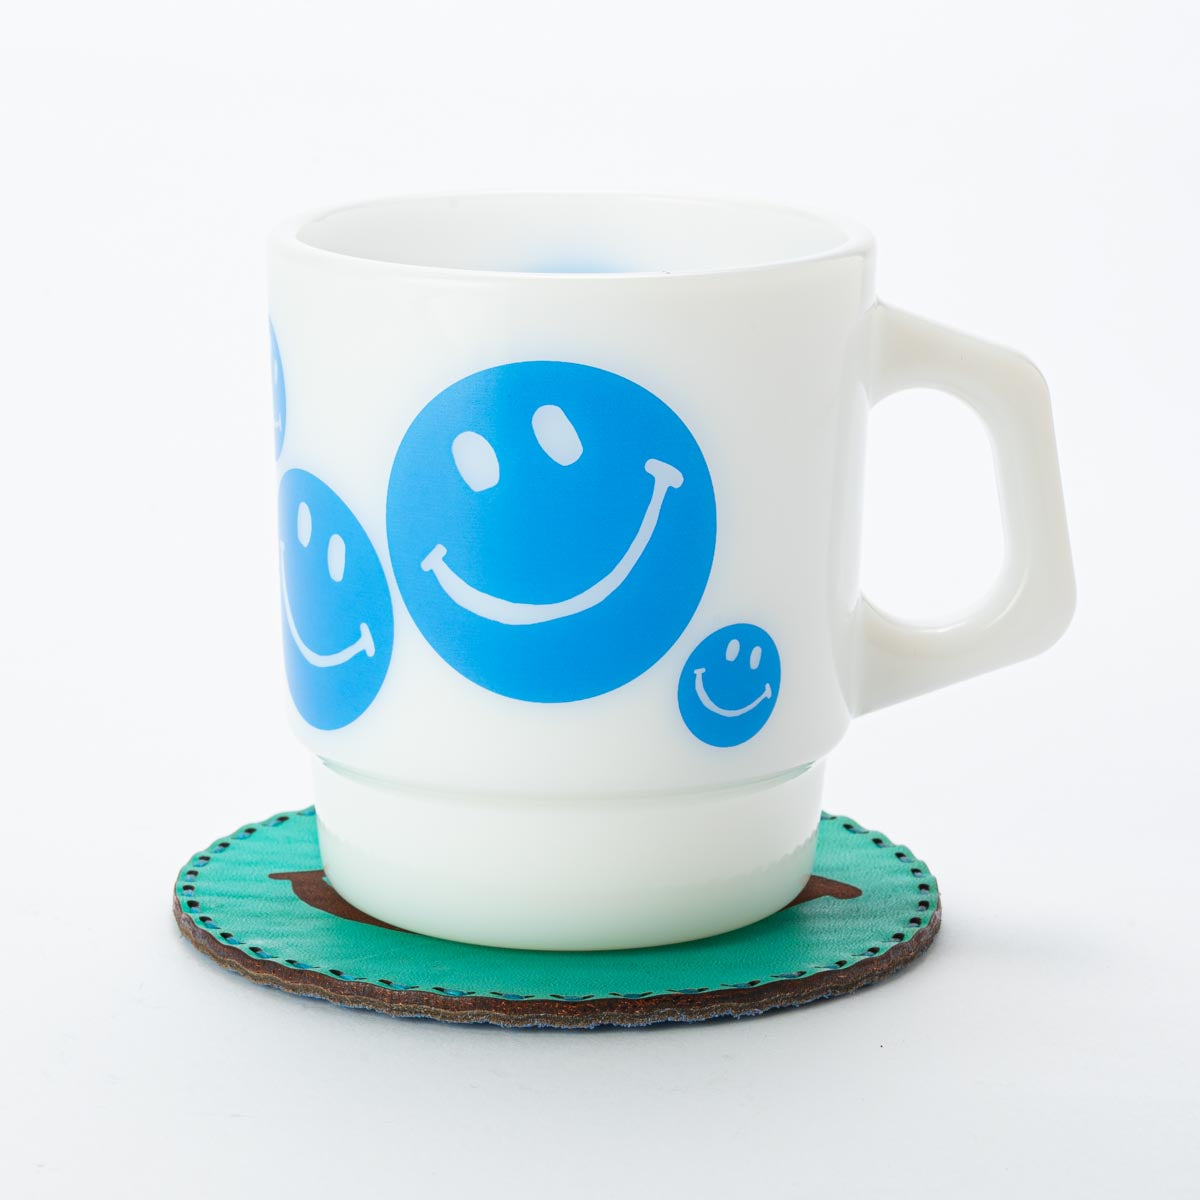 Fire-King レザーコースター SMILEY FACE ブルー by OJAGA DESIGN